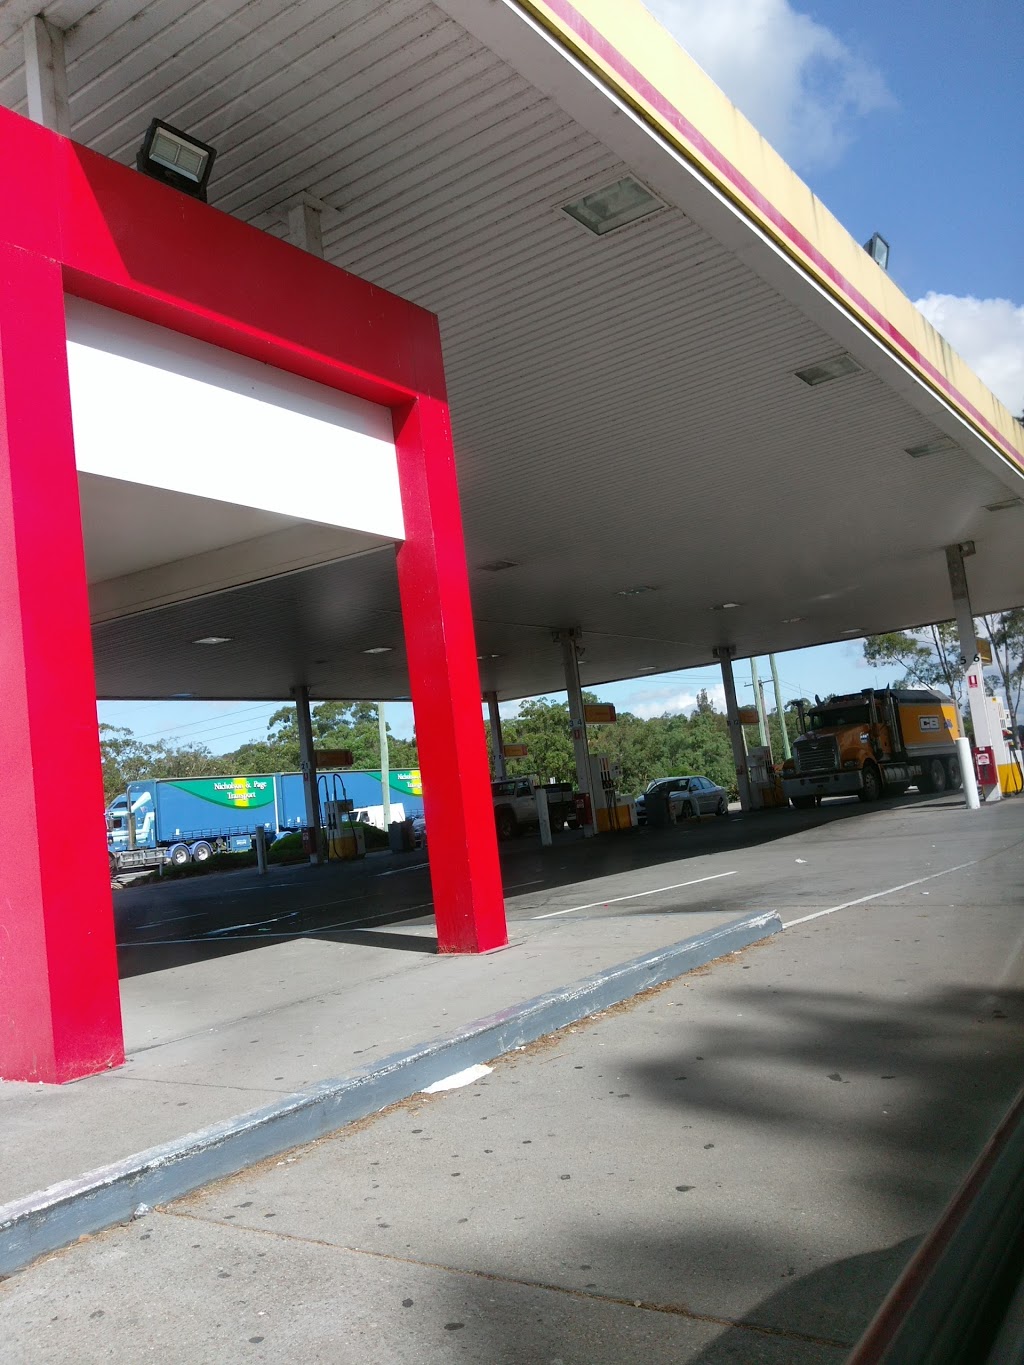 Coles Express | gas station | 2137 Pacific Hwy, Motto Farm NSW 2324, Australia | 0249873155 OR +61 2 4987 3155